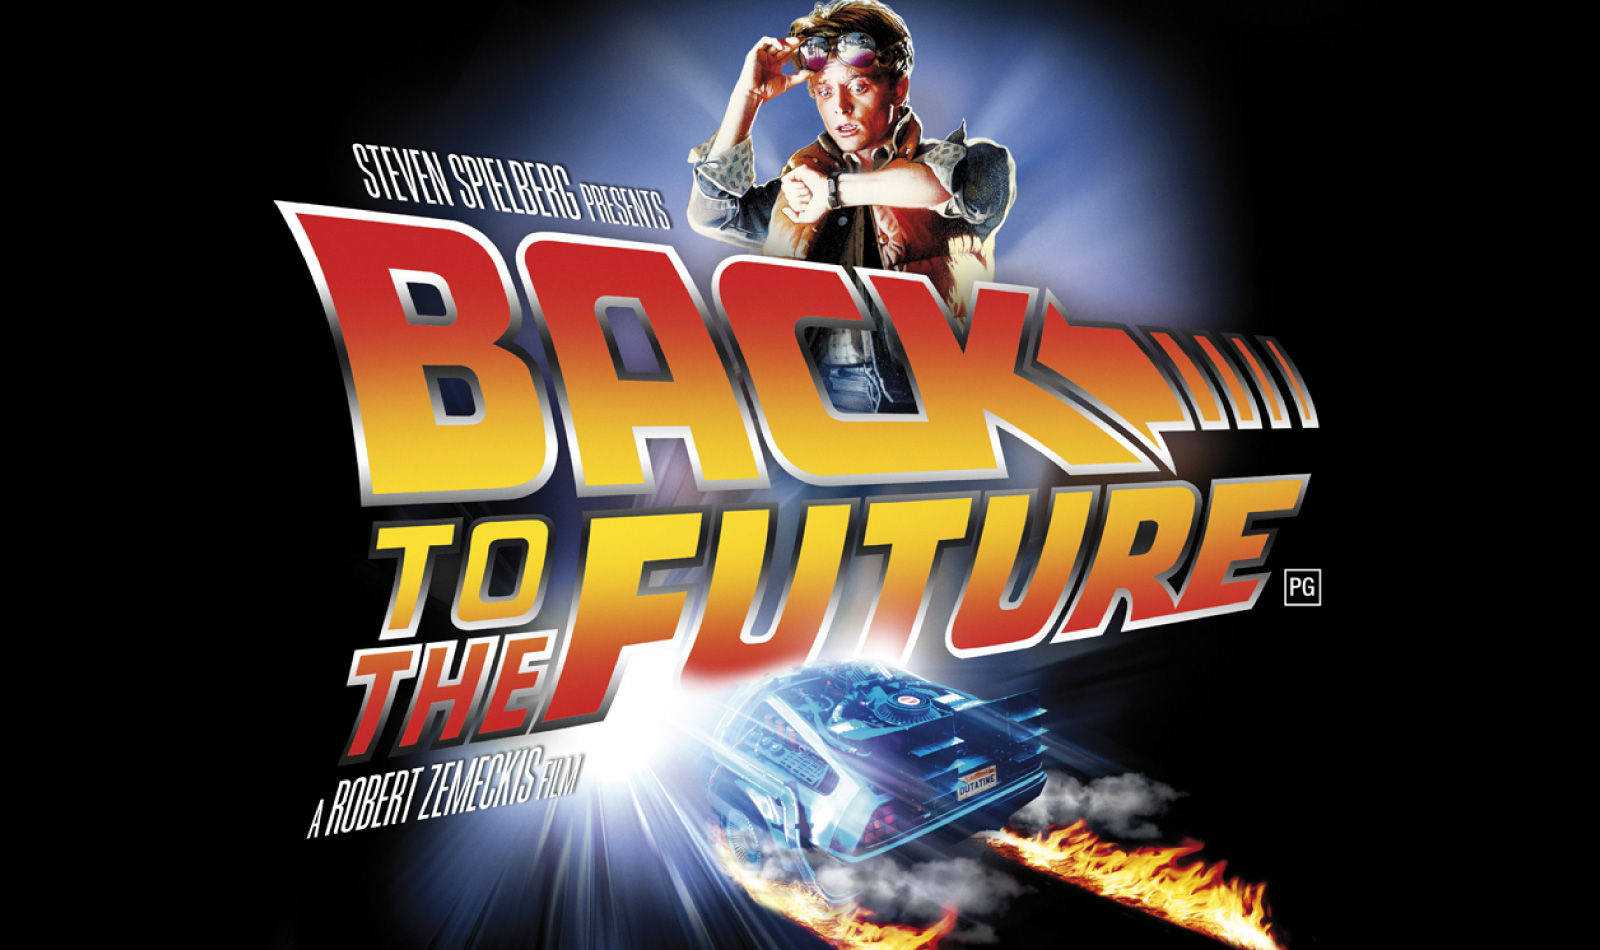 Back to the Future Day, the film in cinemas in 4K. Where to see it in Naples